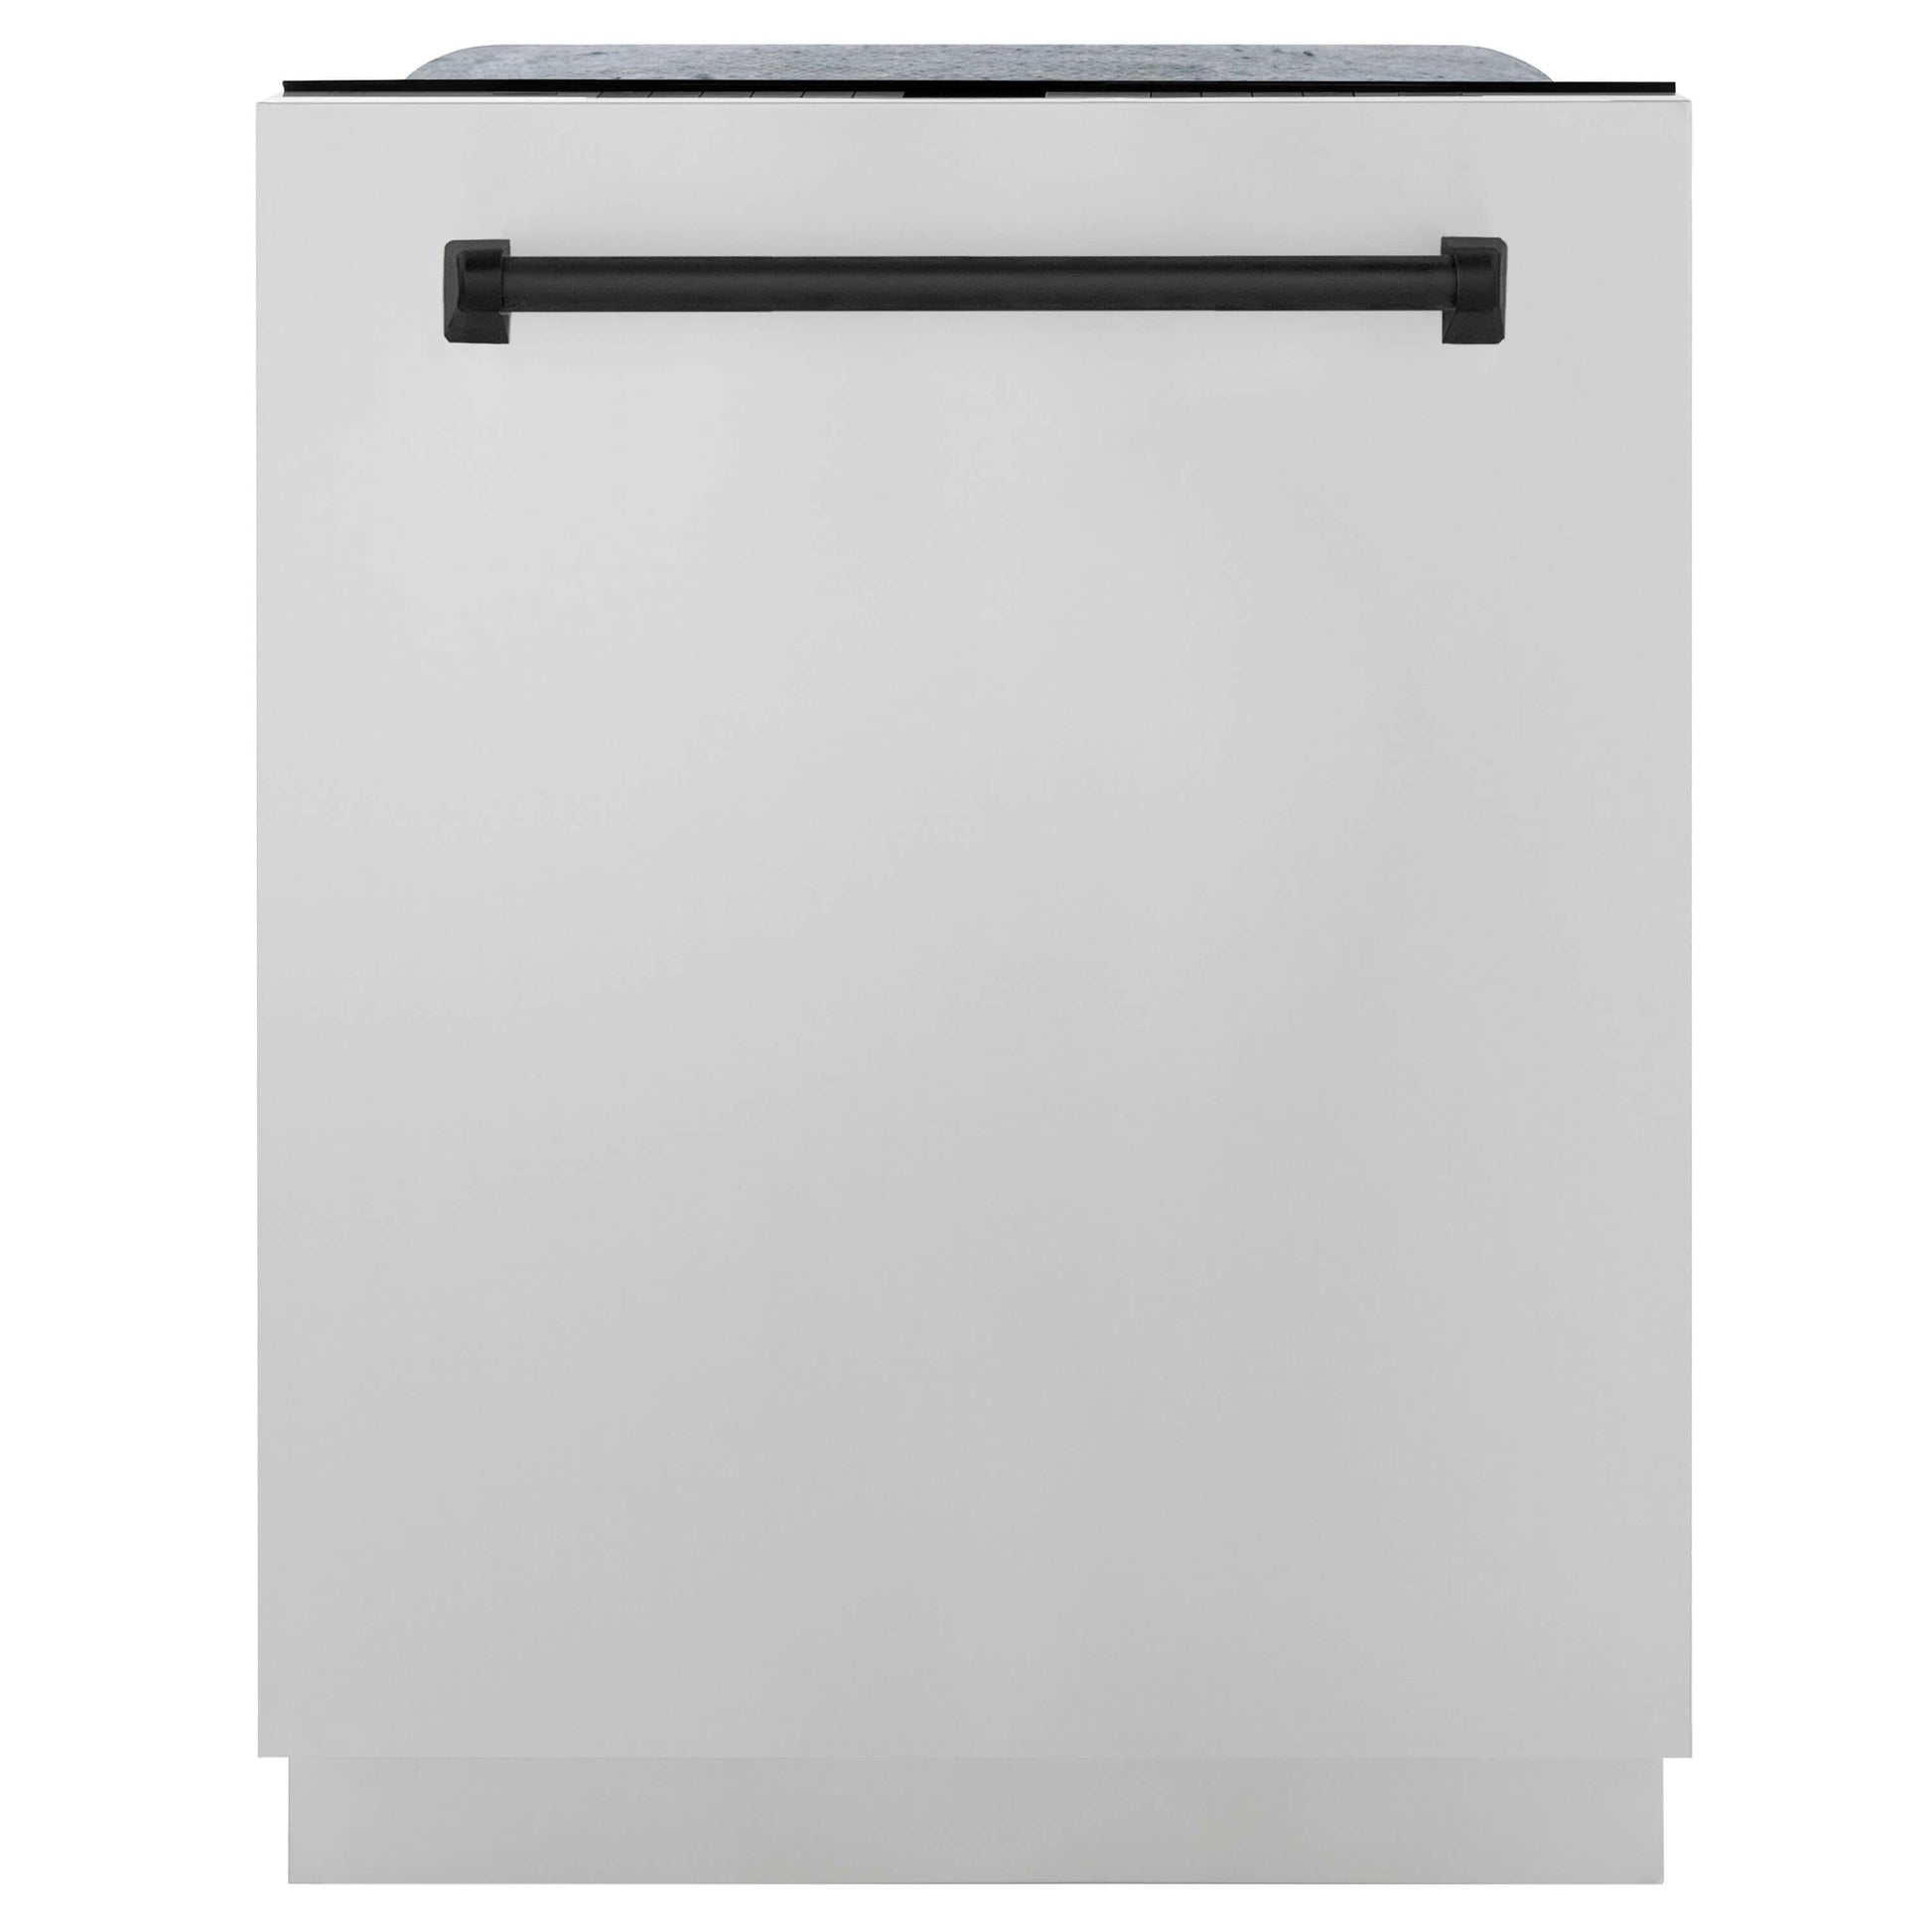 ZLINE 4-Appliance 30" Autograph Edition Kitchen Package with Stainless Steel Dual Fuel Range, Range Hood, Dishwasher, and Refrigeration Including External Water Dispenser with Matte Black Accents